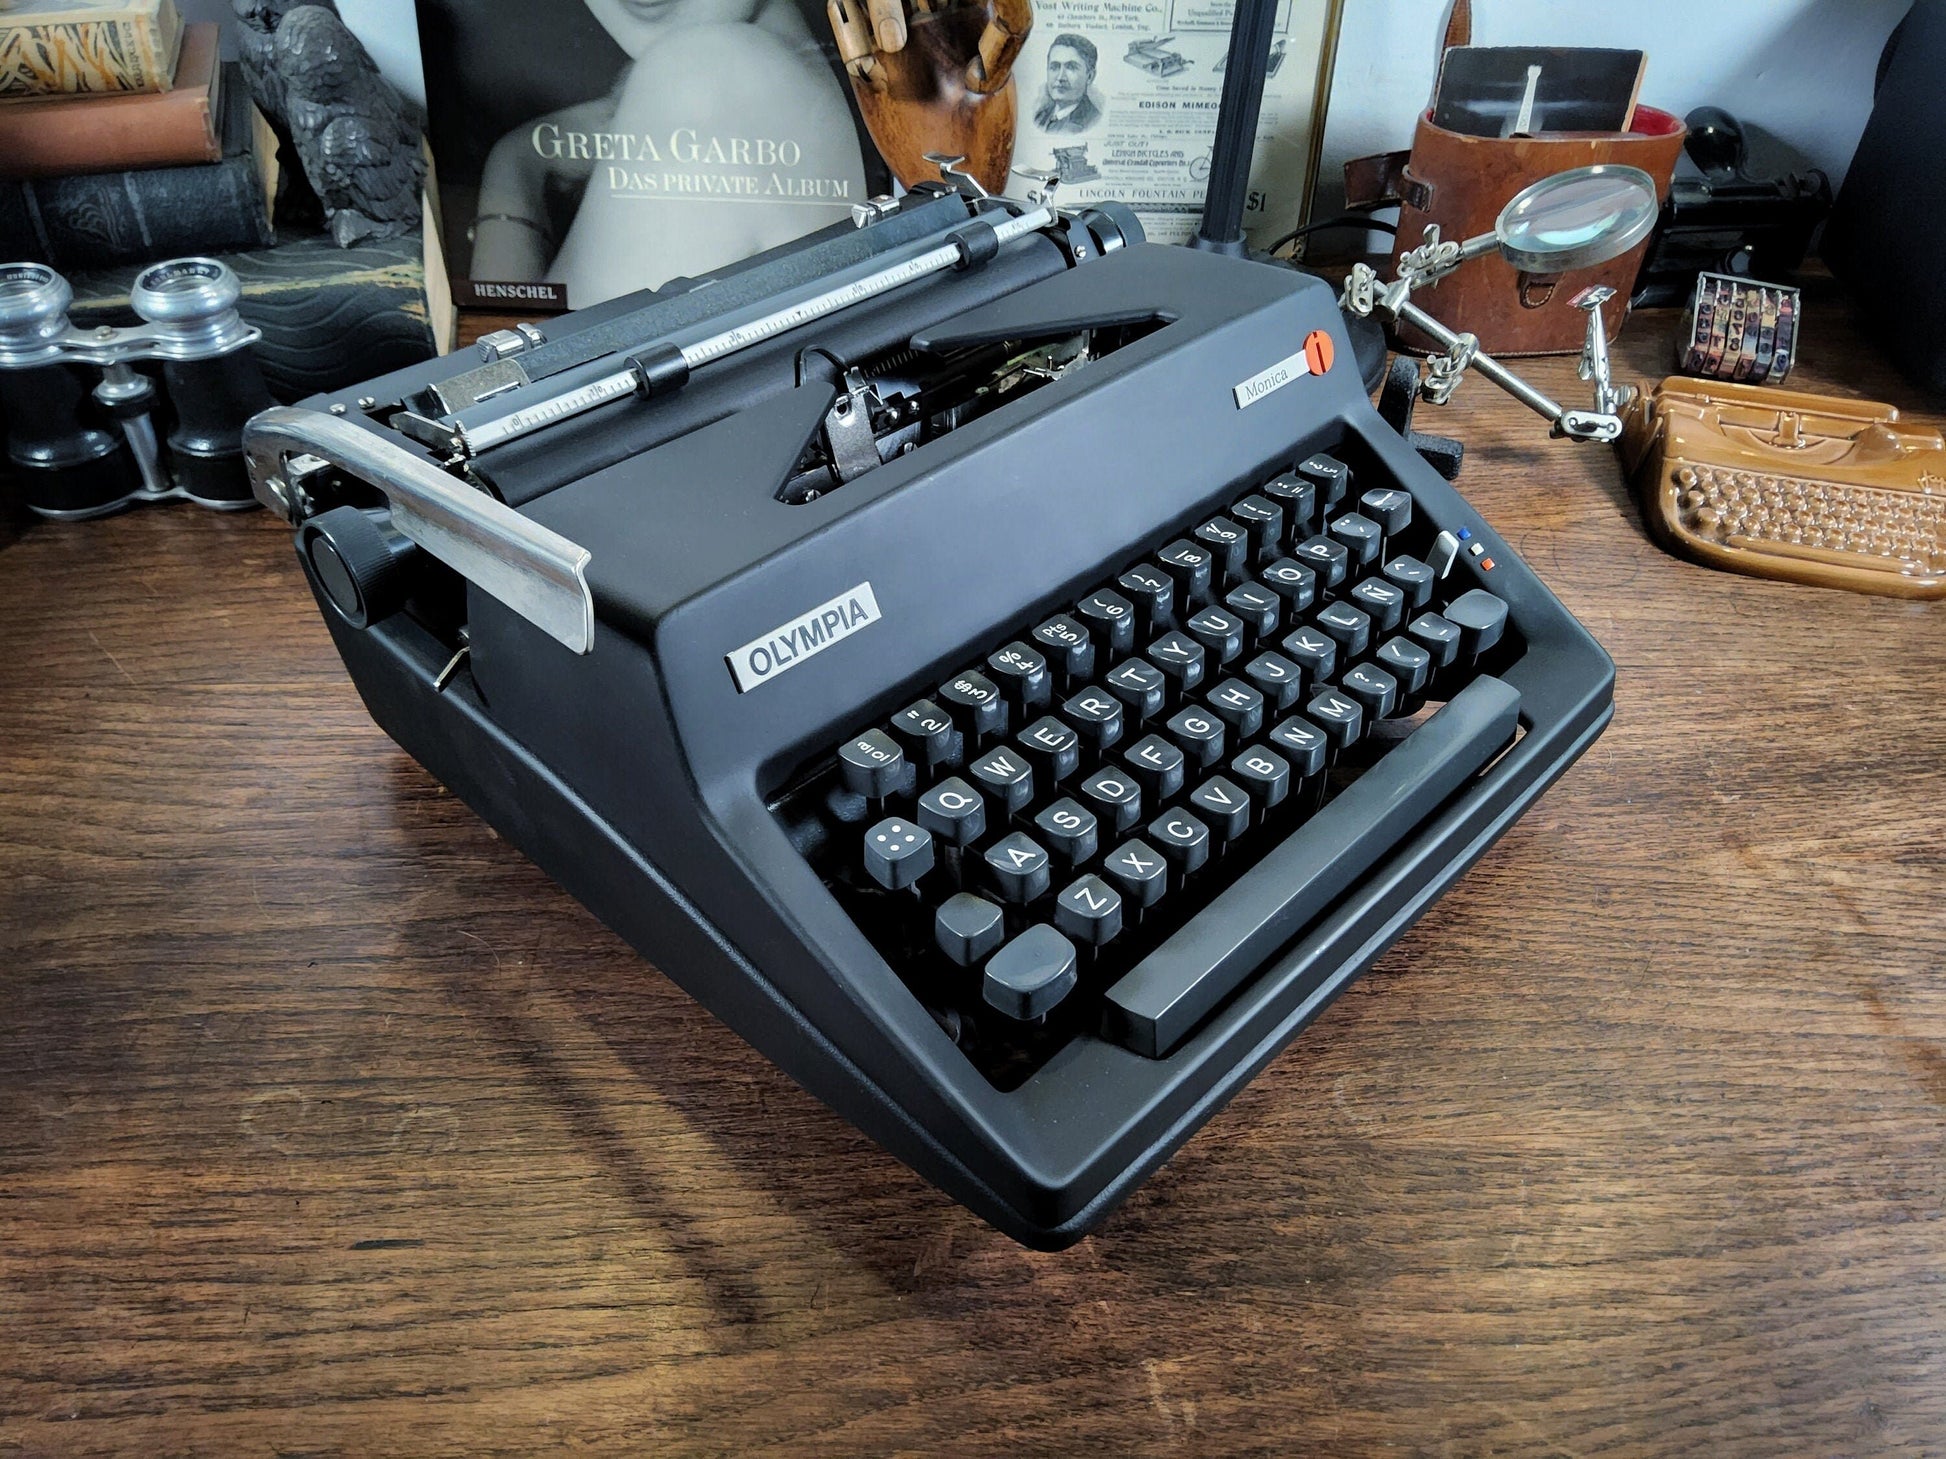 BEST OFFER! Olympia SM Semi-portable Refurbished! Excellent Condition Perfectly Working Vintage Typewriter, Professionally Serviced, Gift!